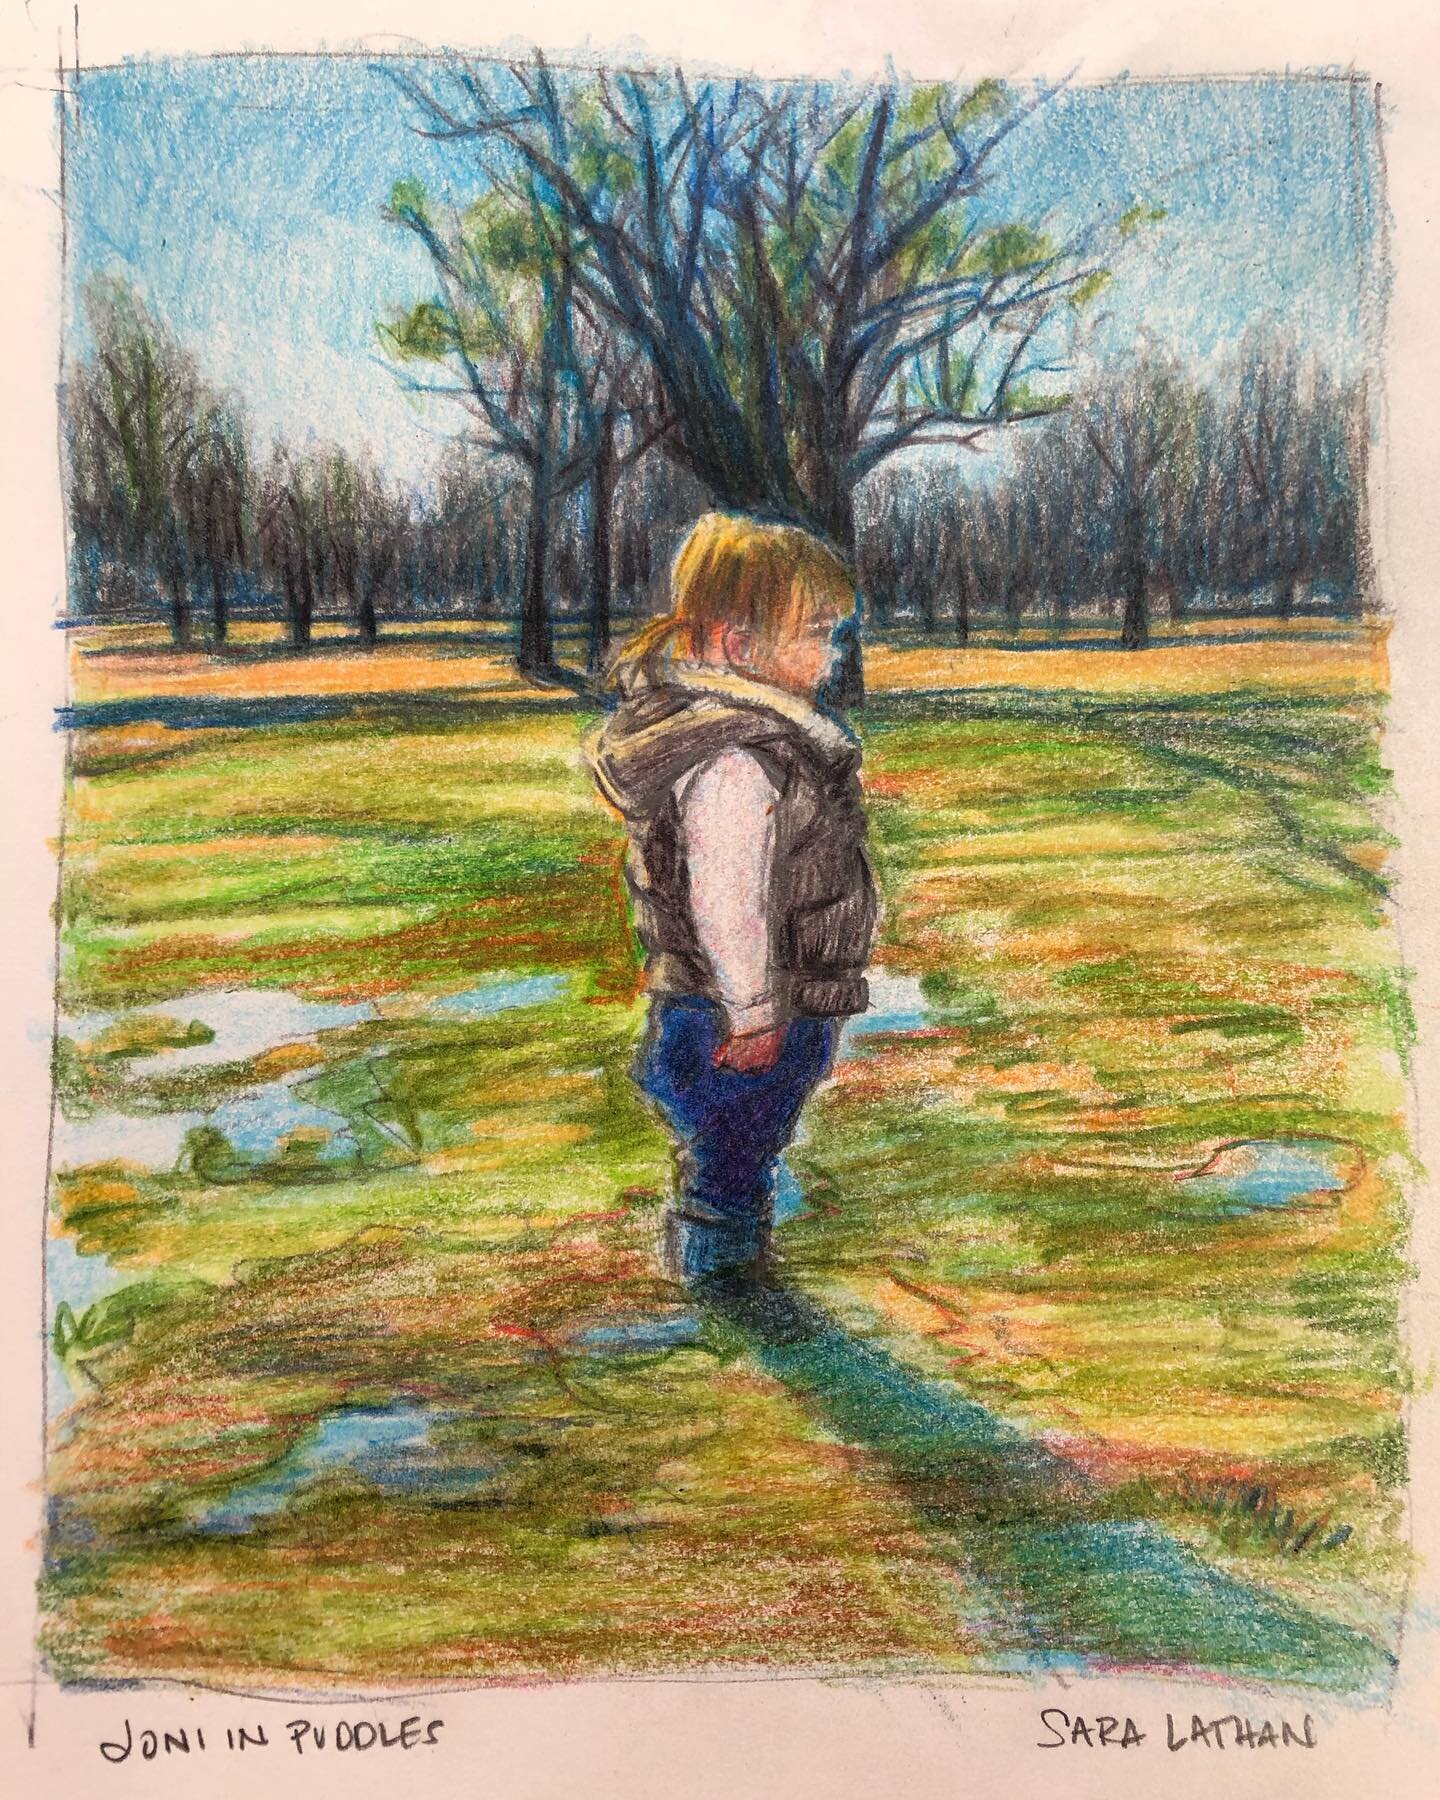 Had some fun with my new colored pencils last night. Classic Joni, just zoning out, standing in a puddle.